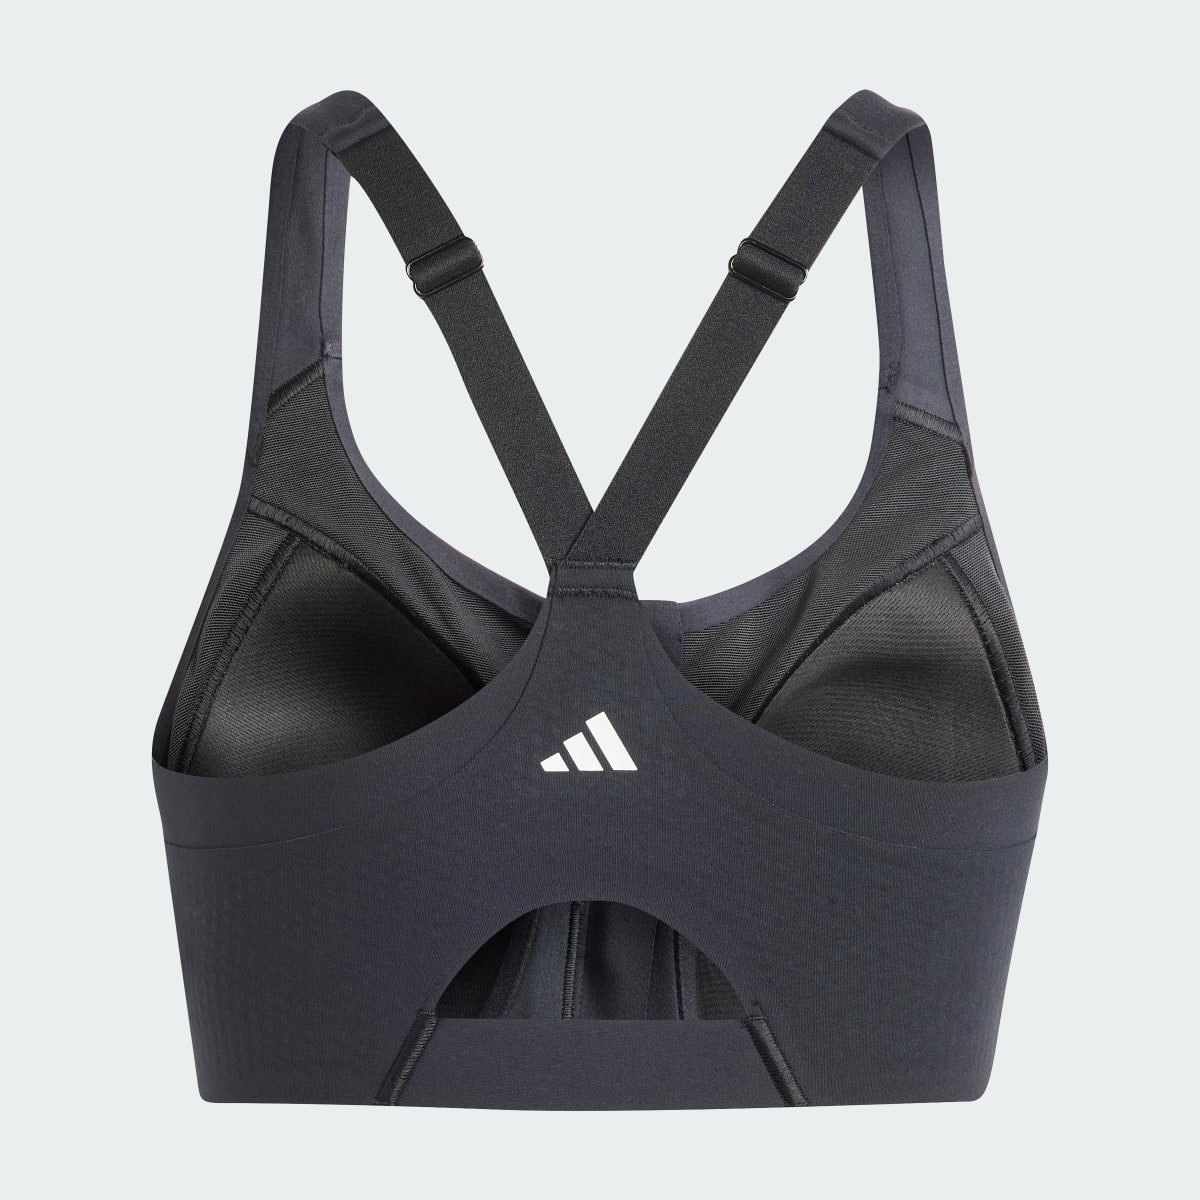 Adidas Brassière zippée maintien fort TLRD Impact Luxe. 7